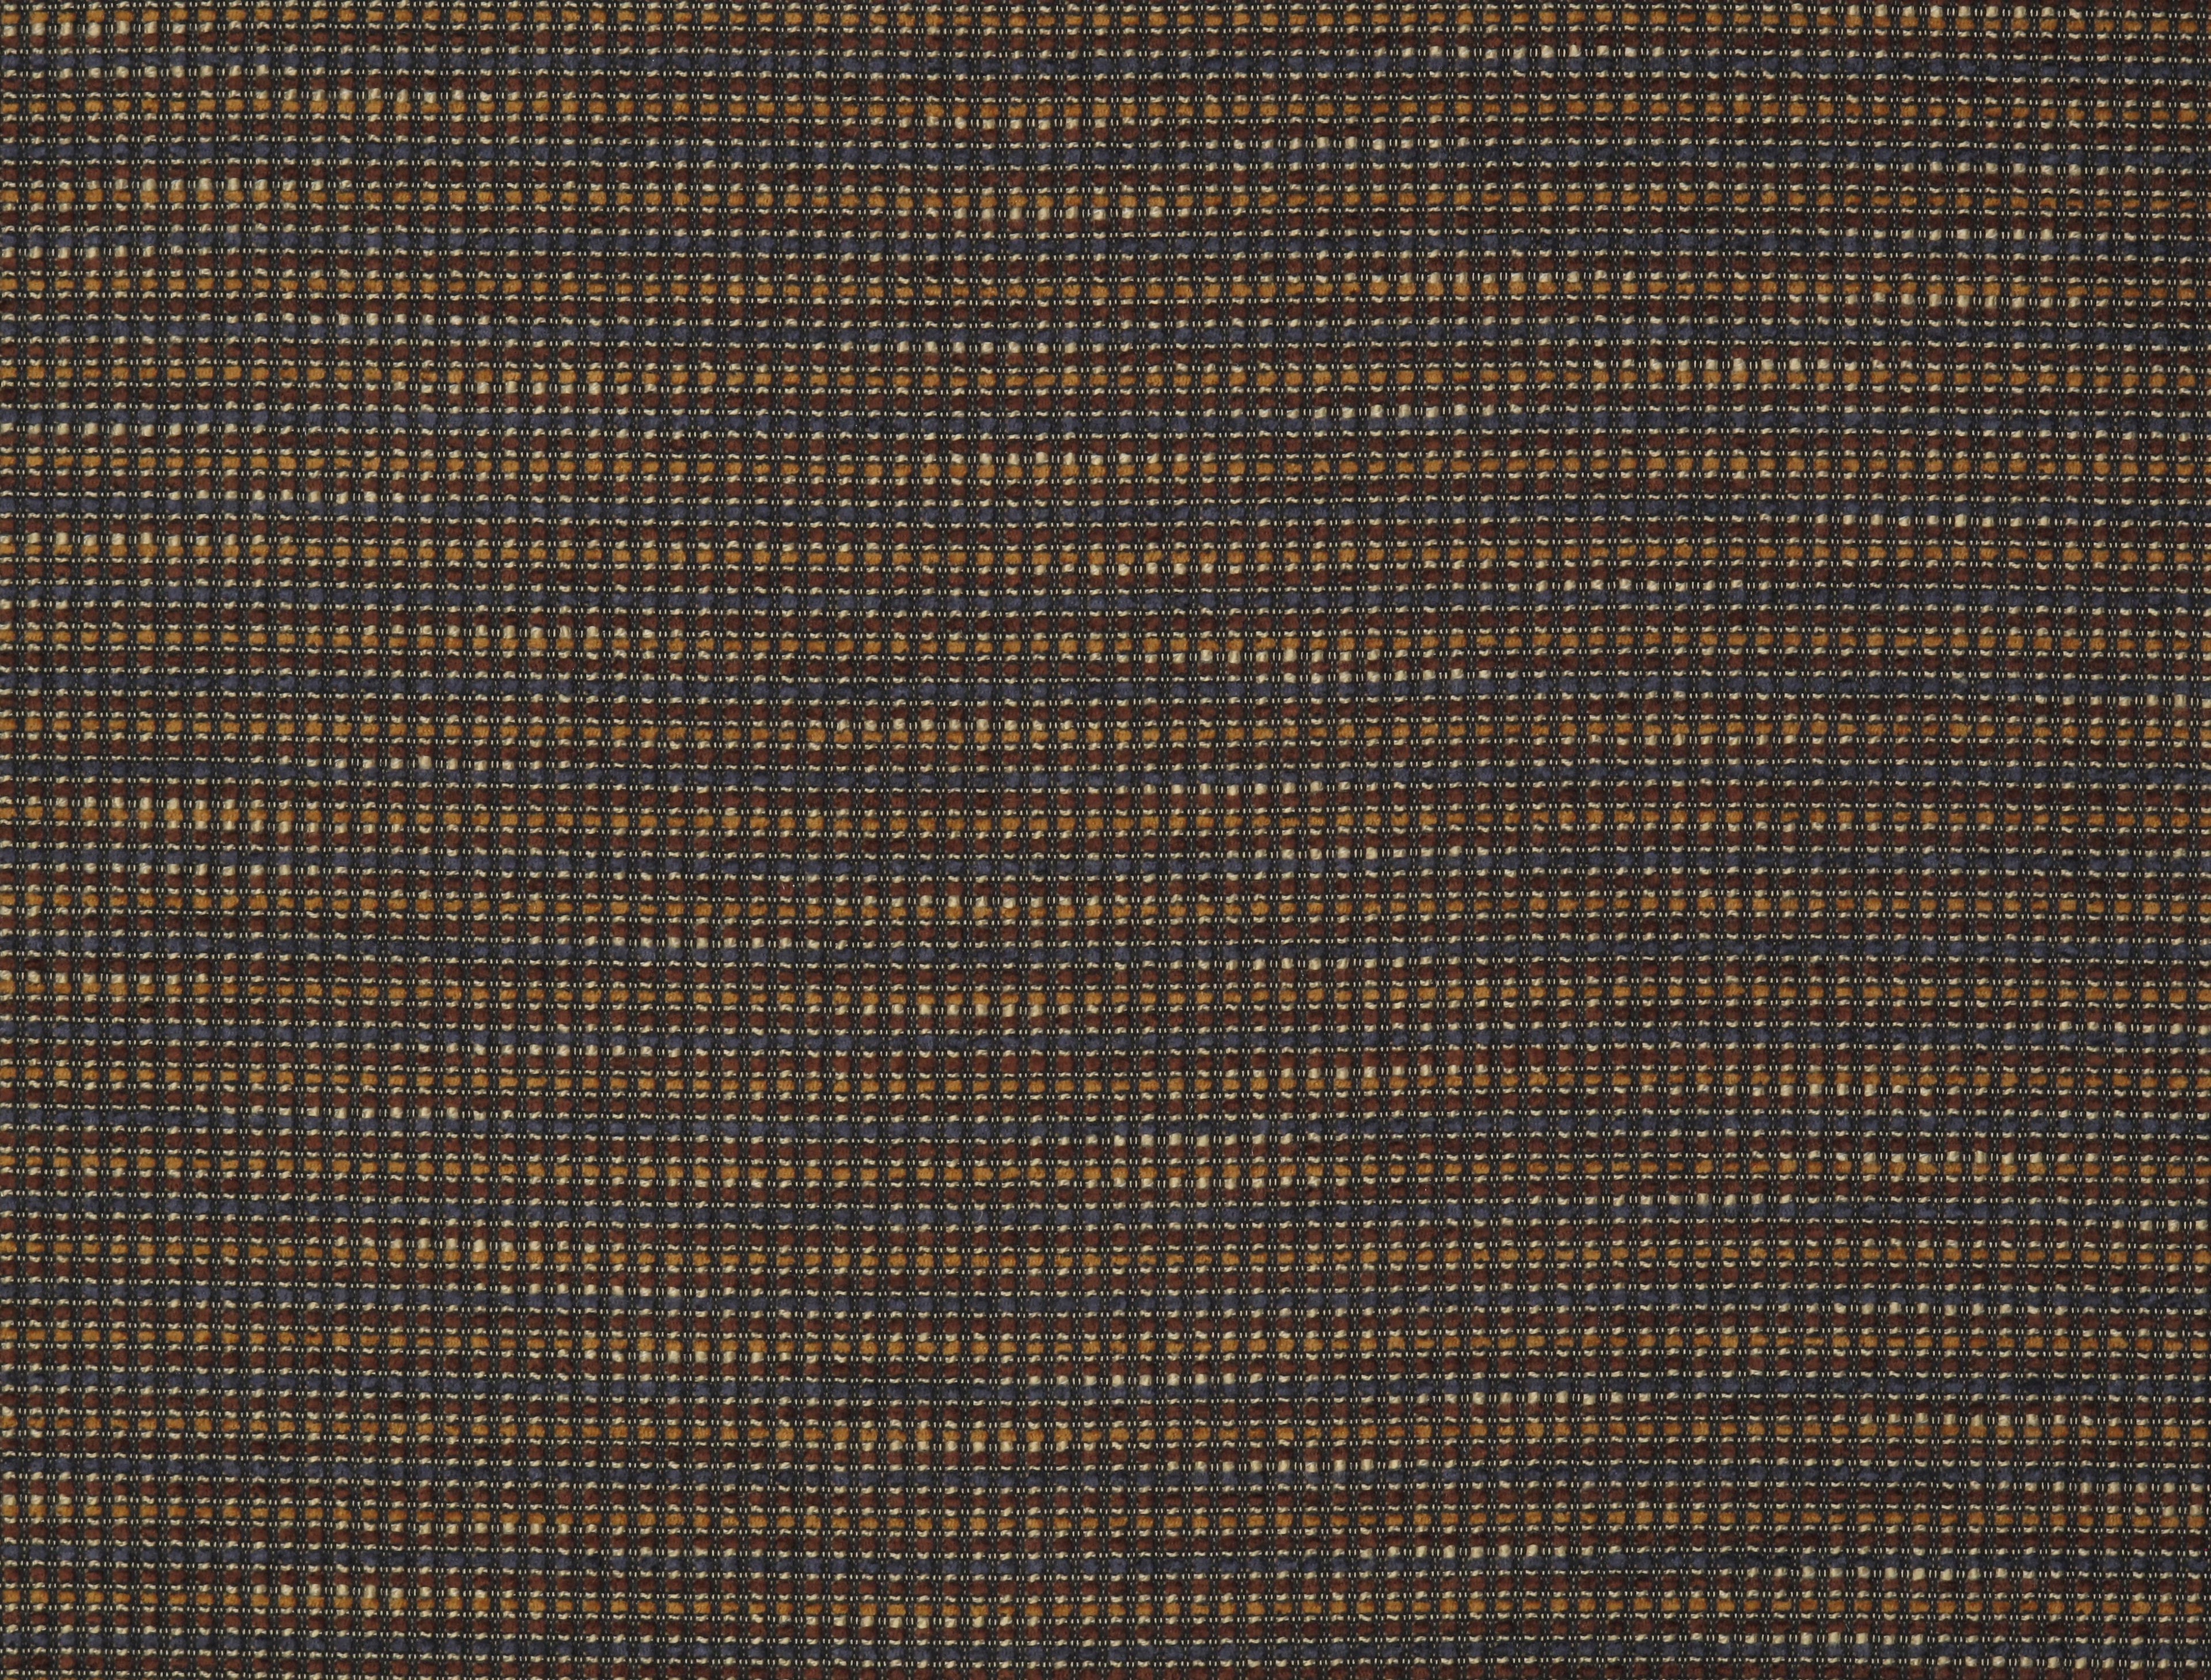 Avondale Point fabric in indigo/brown color - pattern number HU 0C322993 - by Scalamandre in the Old World Weavers collection